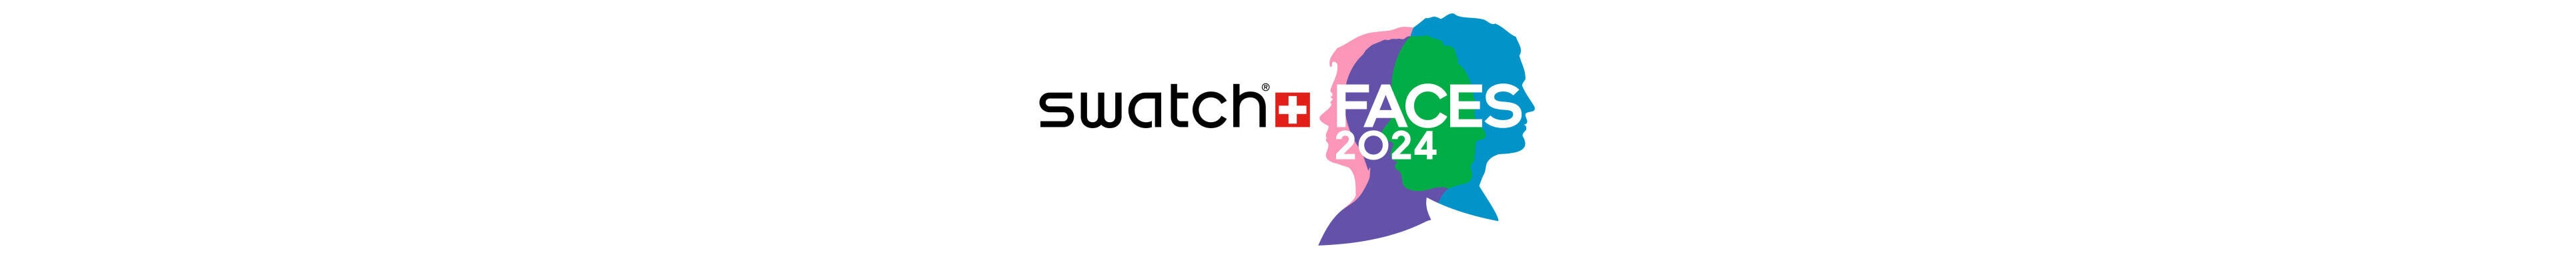 Swatch Faces 2024